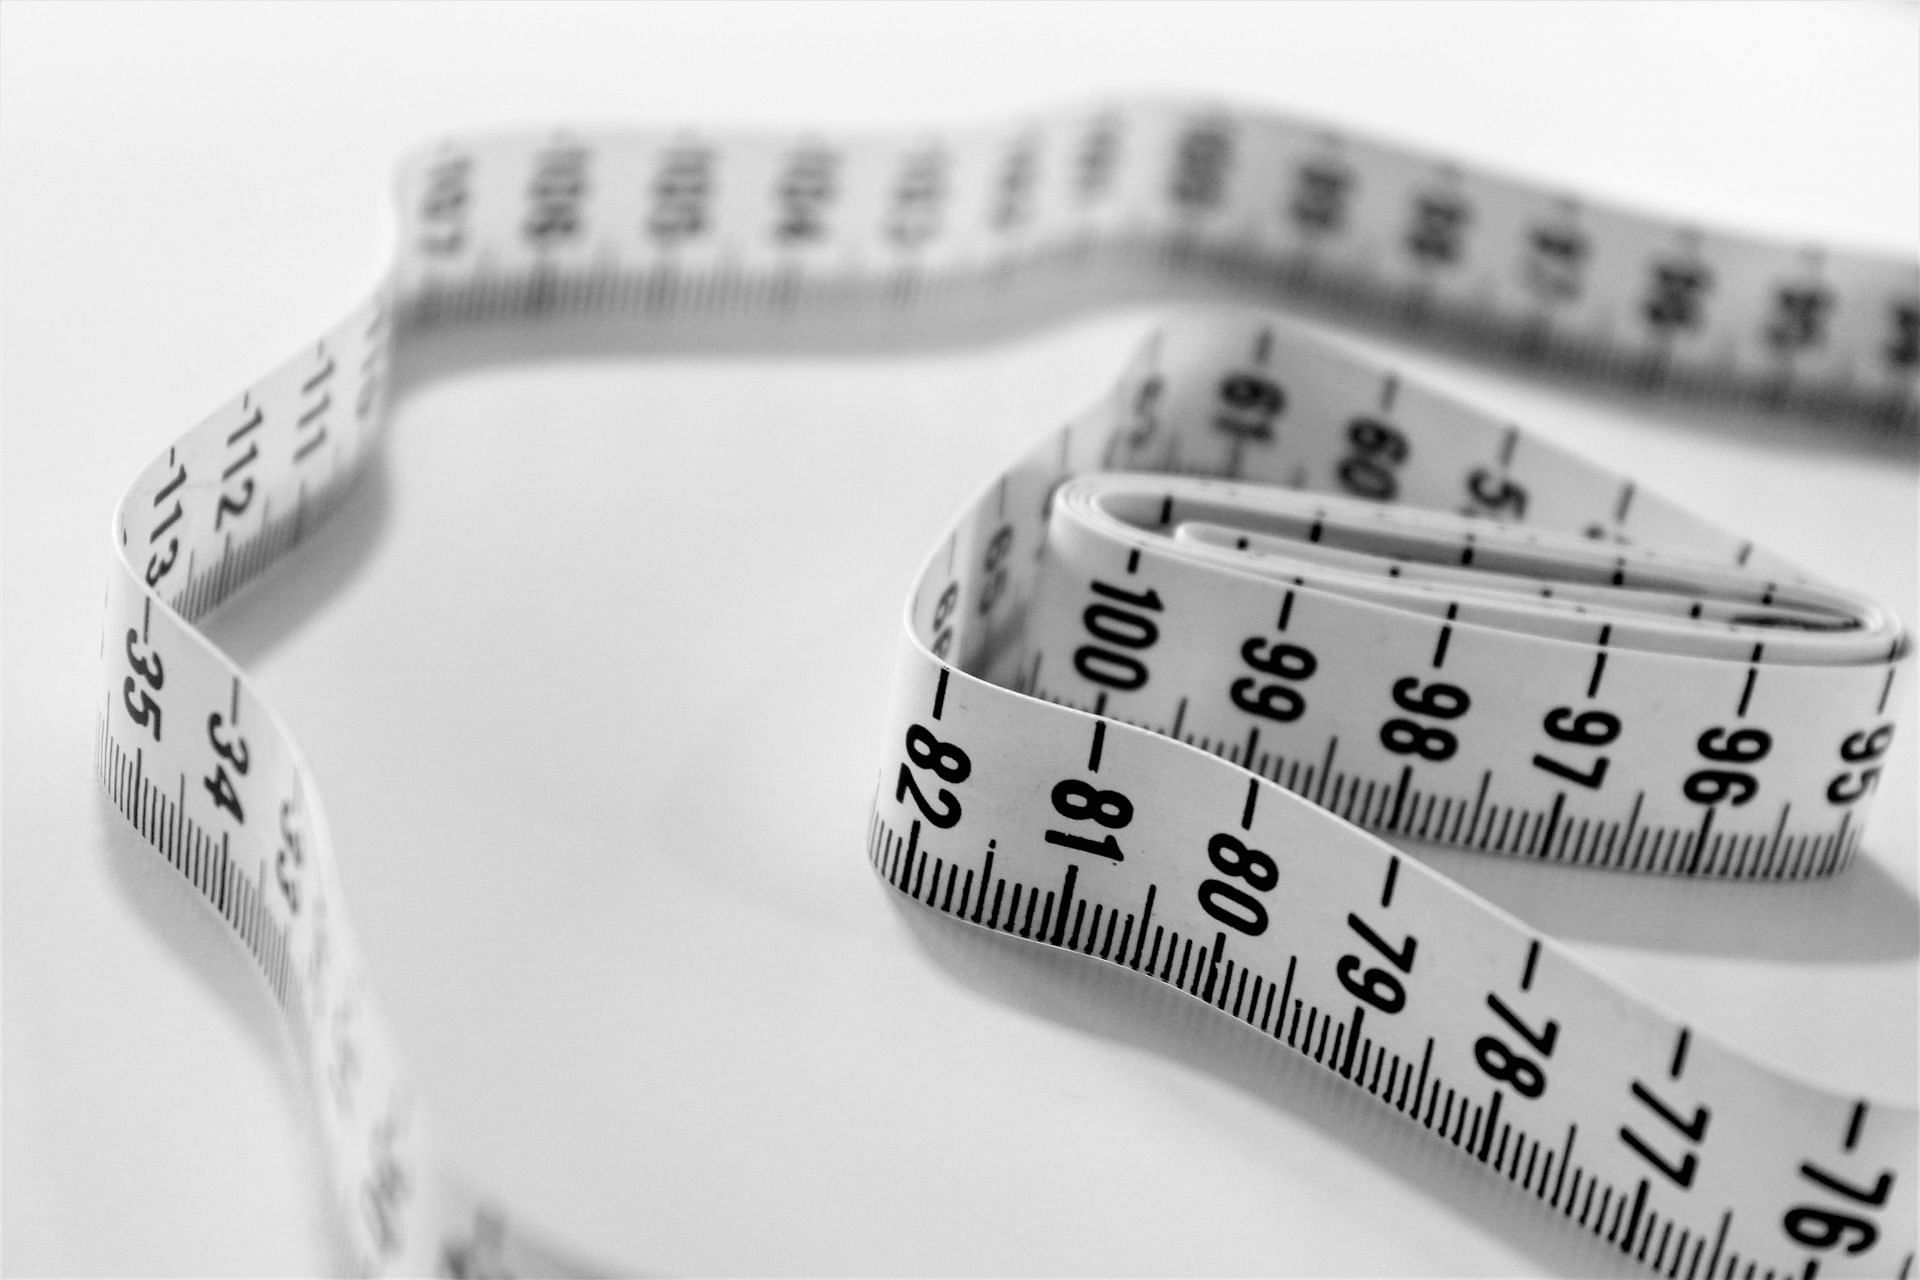 Is antidepressant weight gain real? or can other factors influence it? (Image via Unsplash/ Siora Photography)